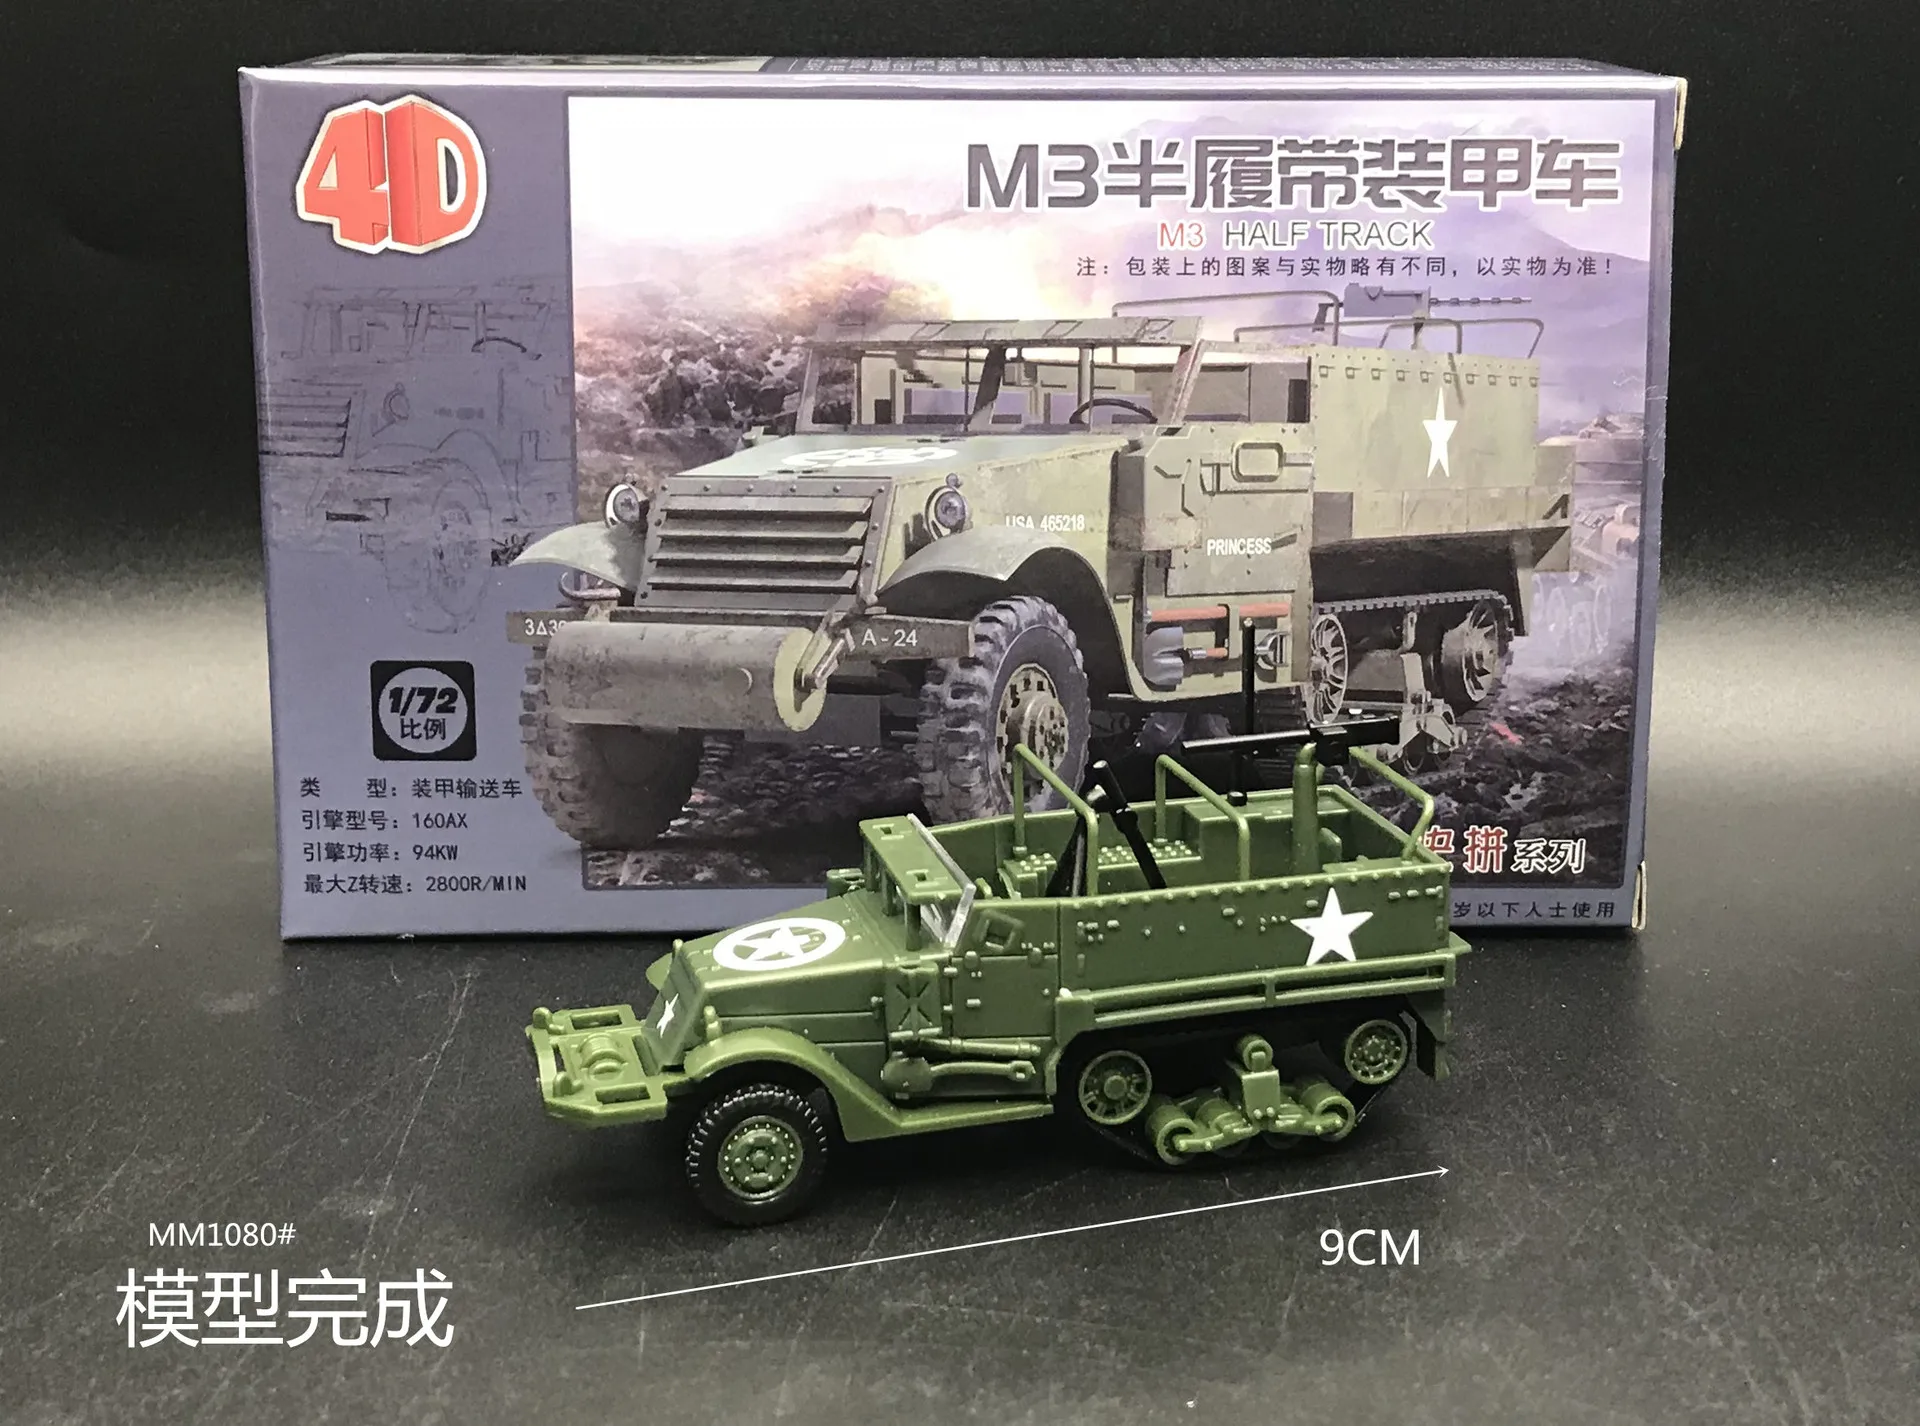 10Pcs Soldiers Model 1:72 4D M3 Half-Track Armored Vehicle Assembly Model Toy 